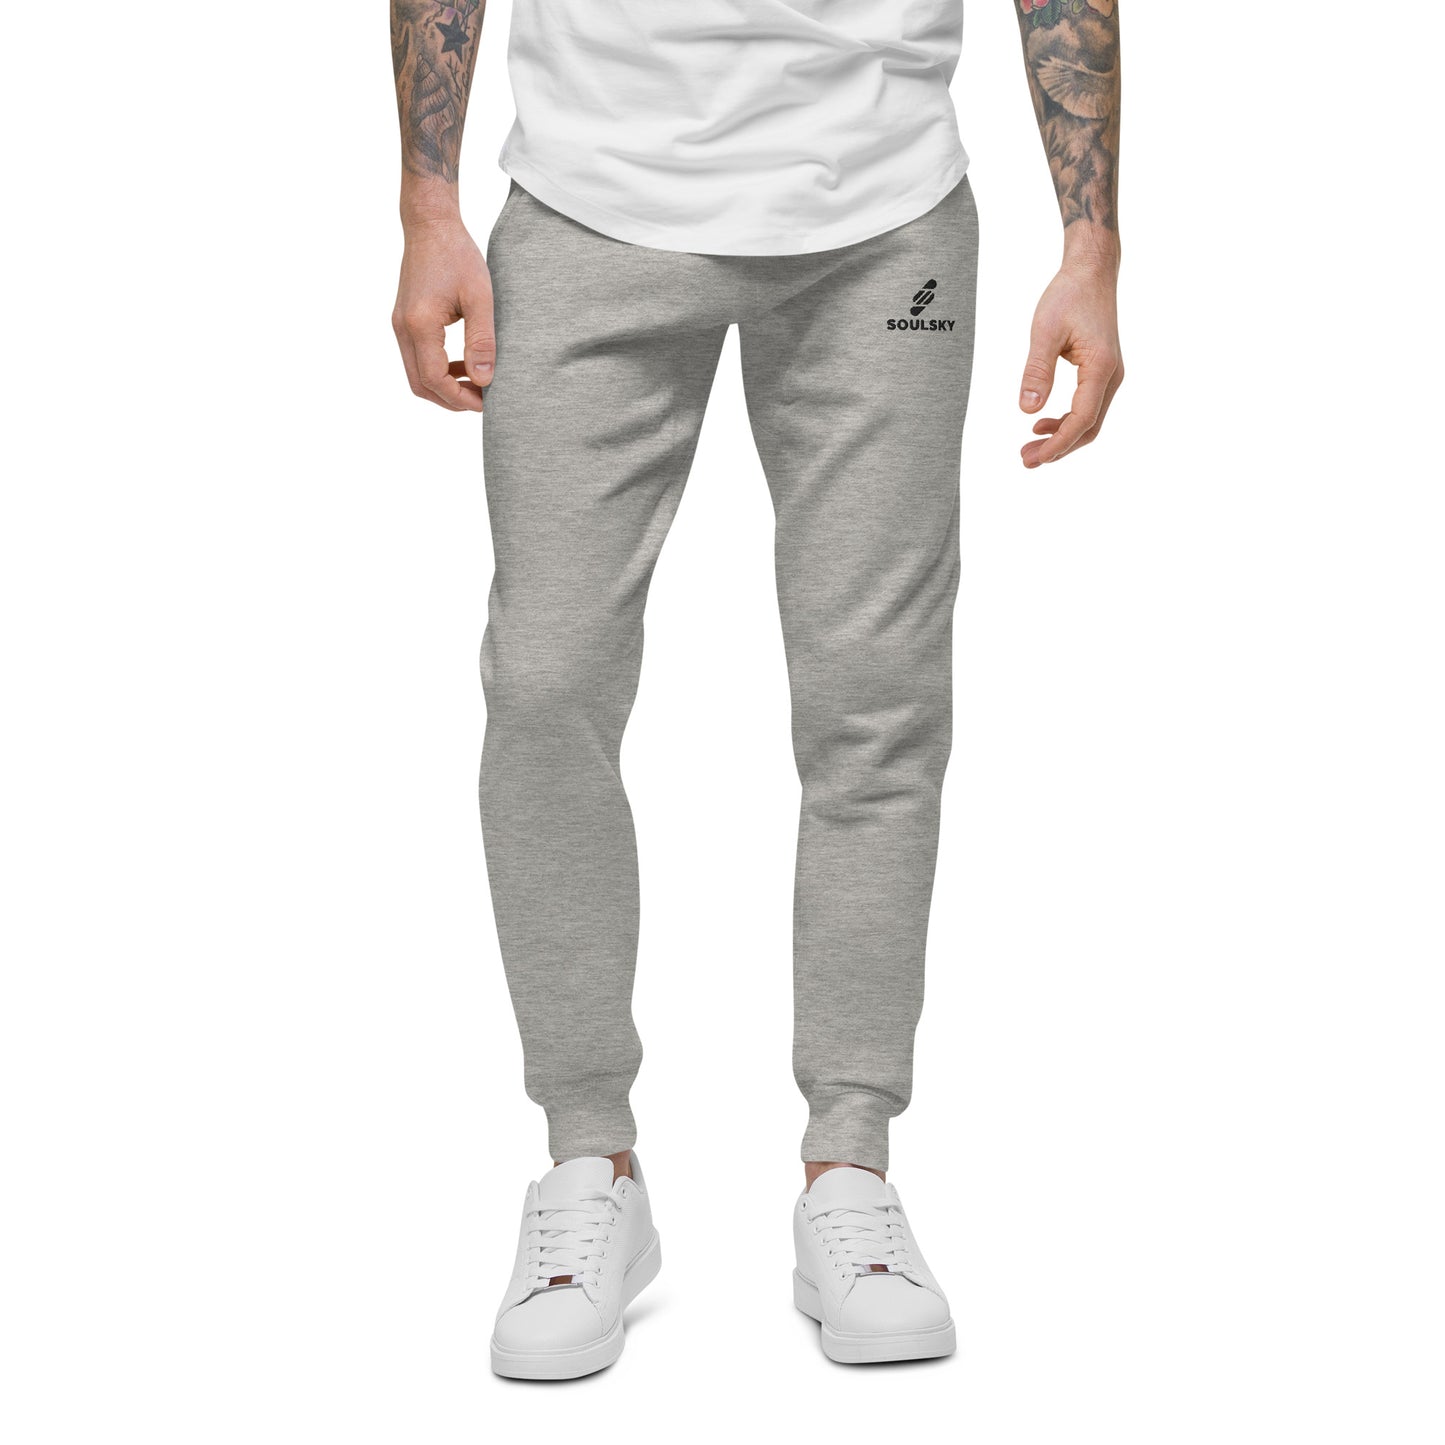 Male model wearing light gray unisex joggers with black embroidered logo on left thigh that says "SOULSKY".